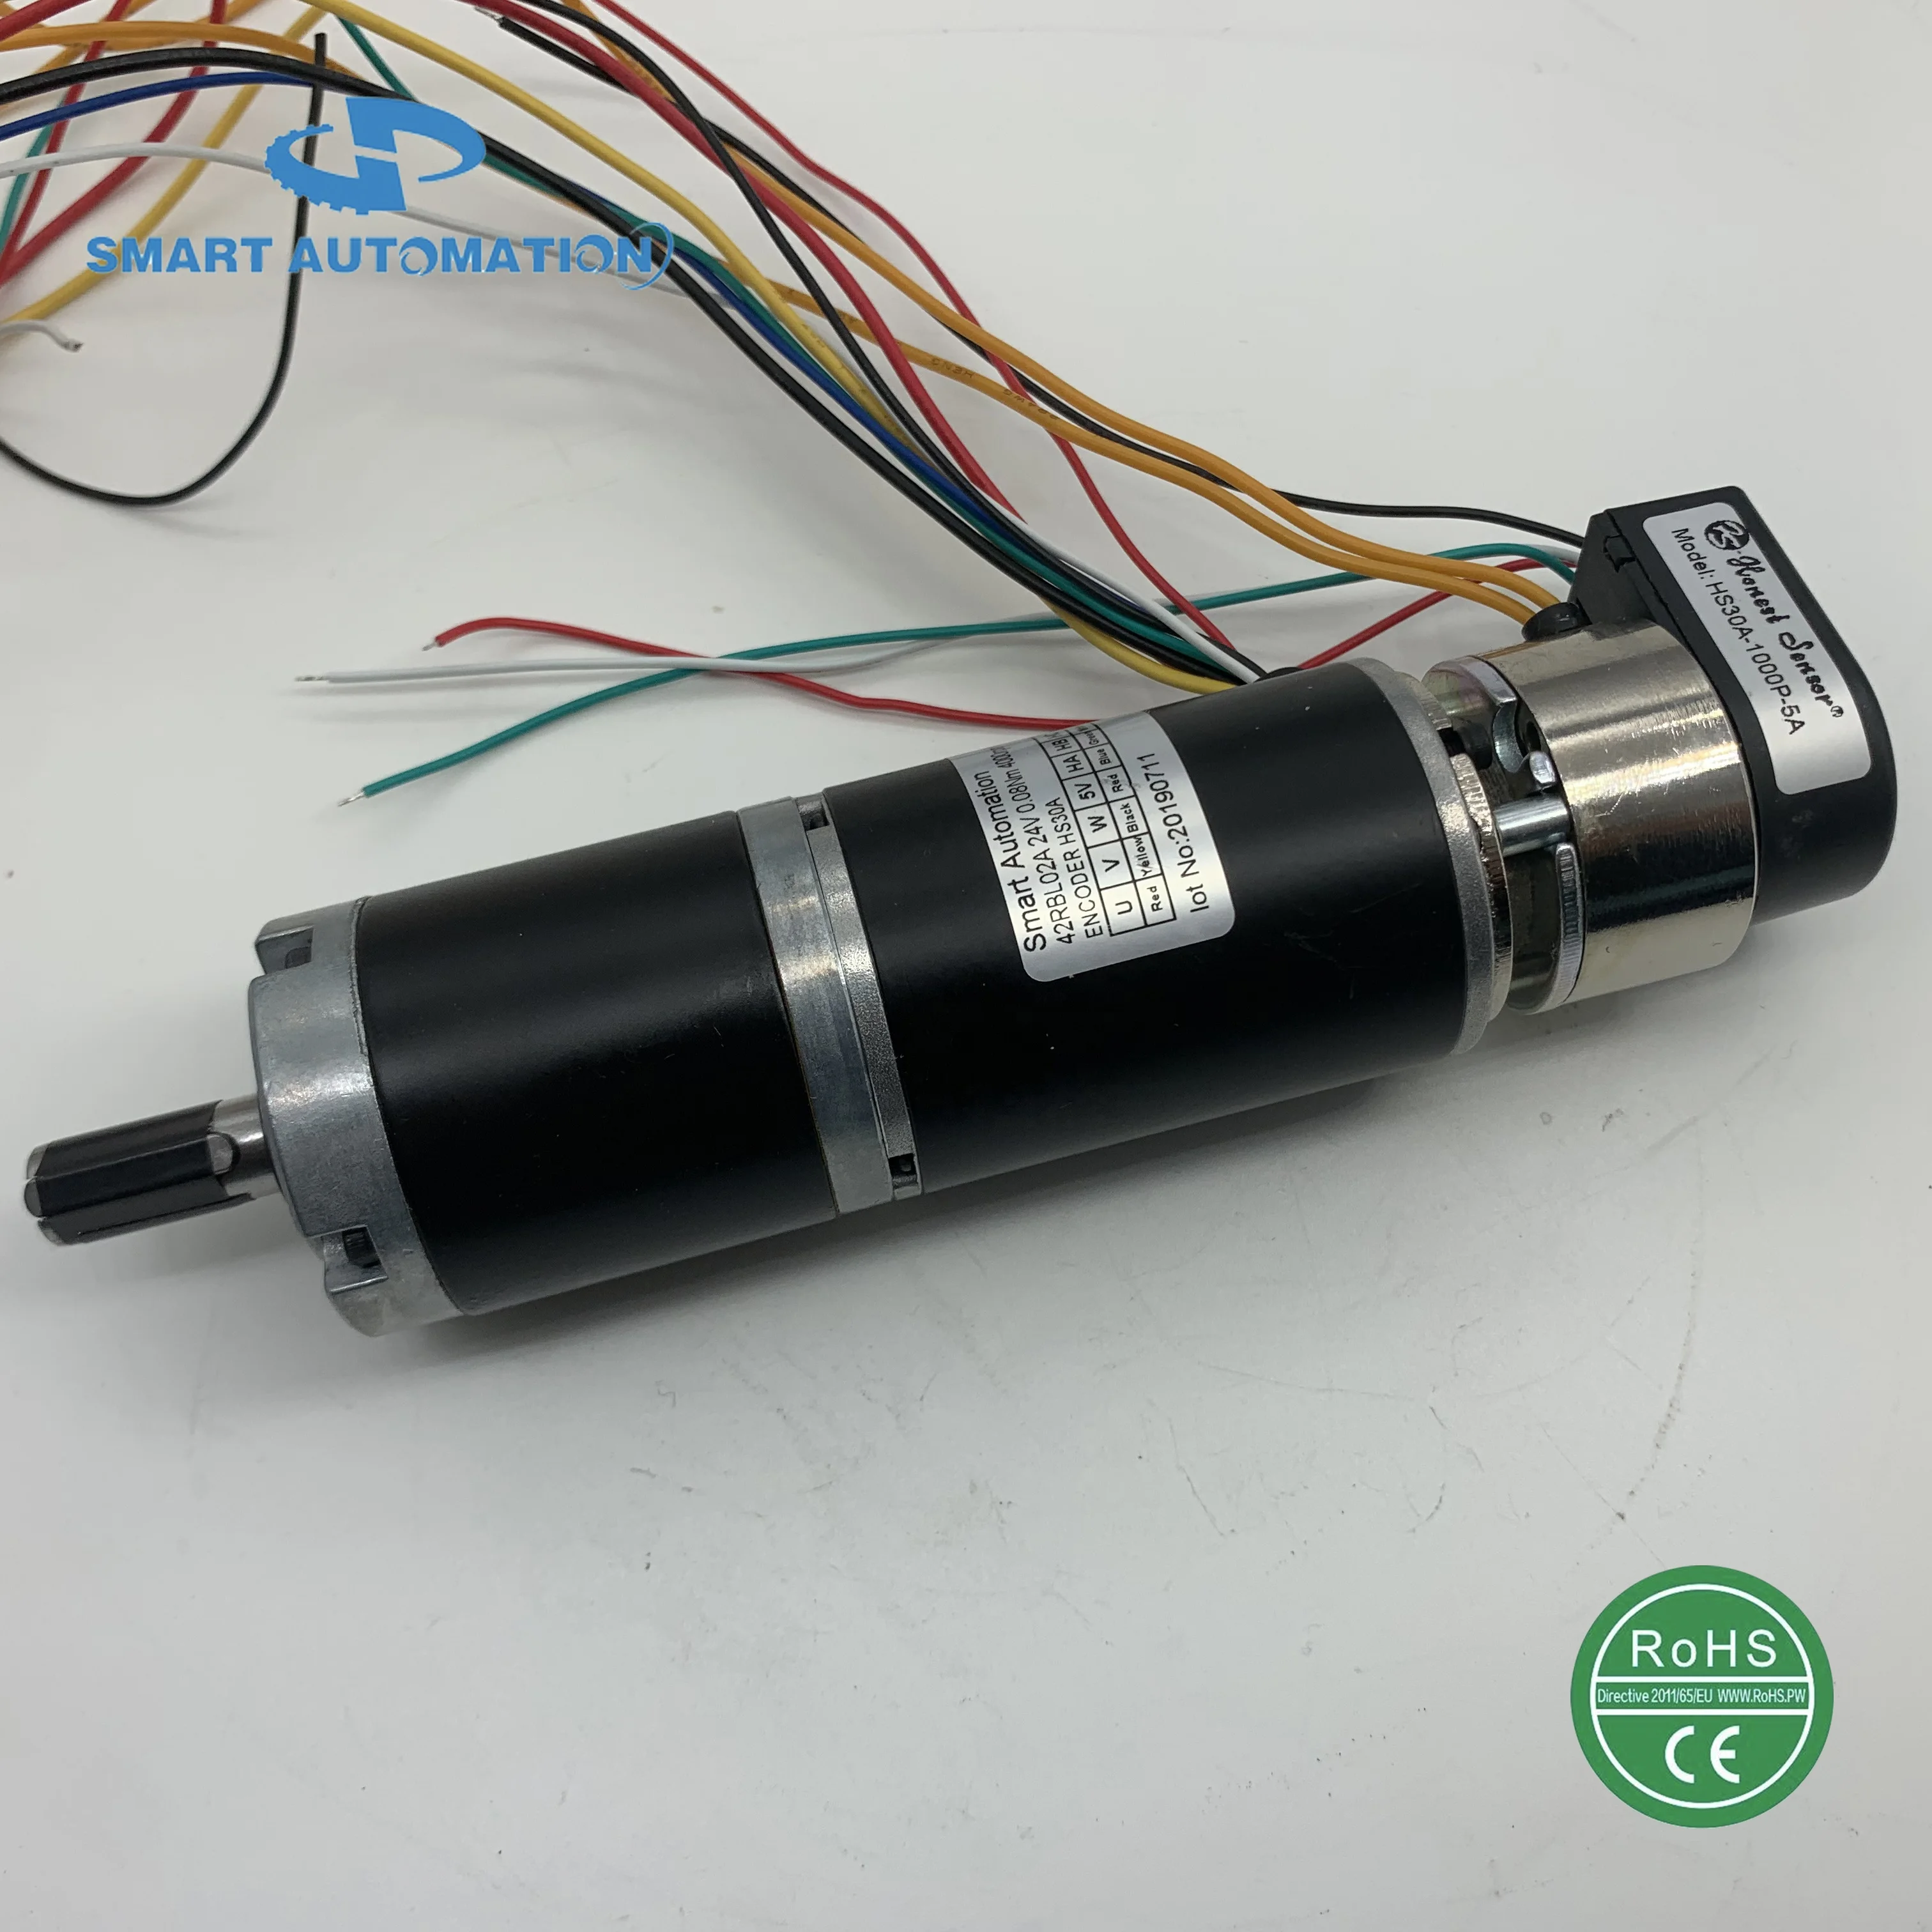 42JXE100K.42RBL  Helical Gear Planetary Gearbox Brushless Dc Motor 25w 50w 70w Low Noise